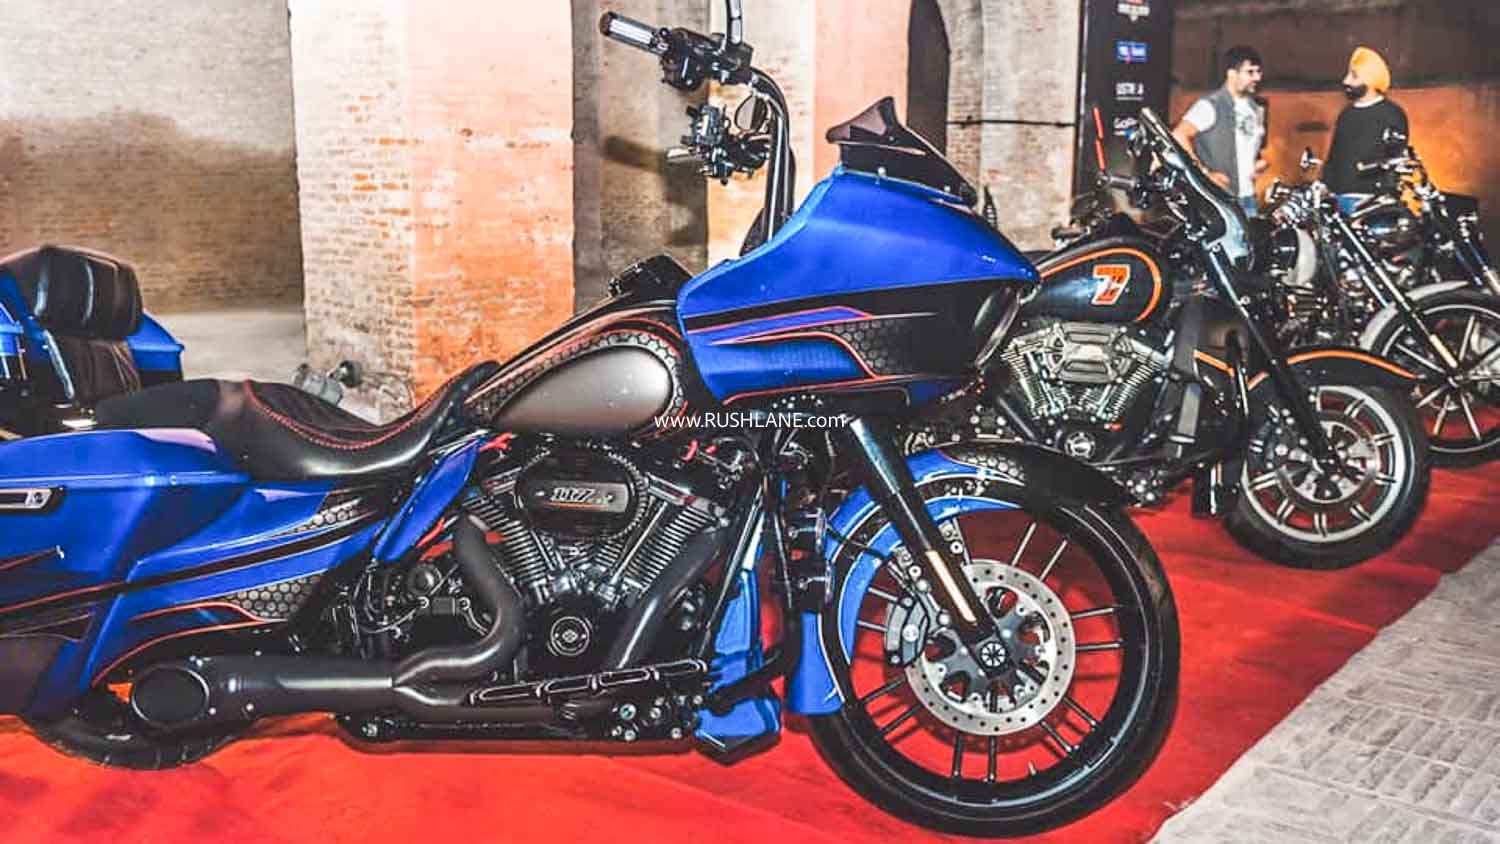 Harley Davidson Bs4 Discount Offers Upto Rs 4 Lakh Announced